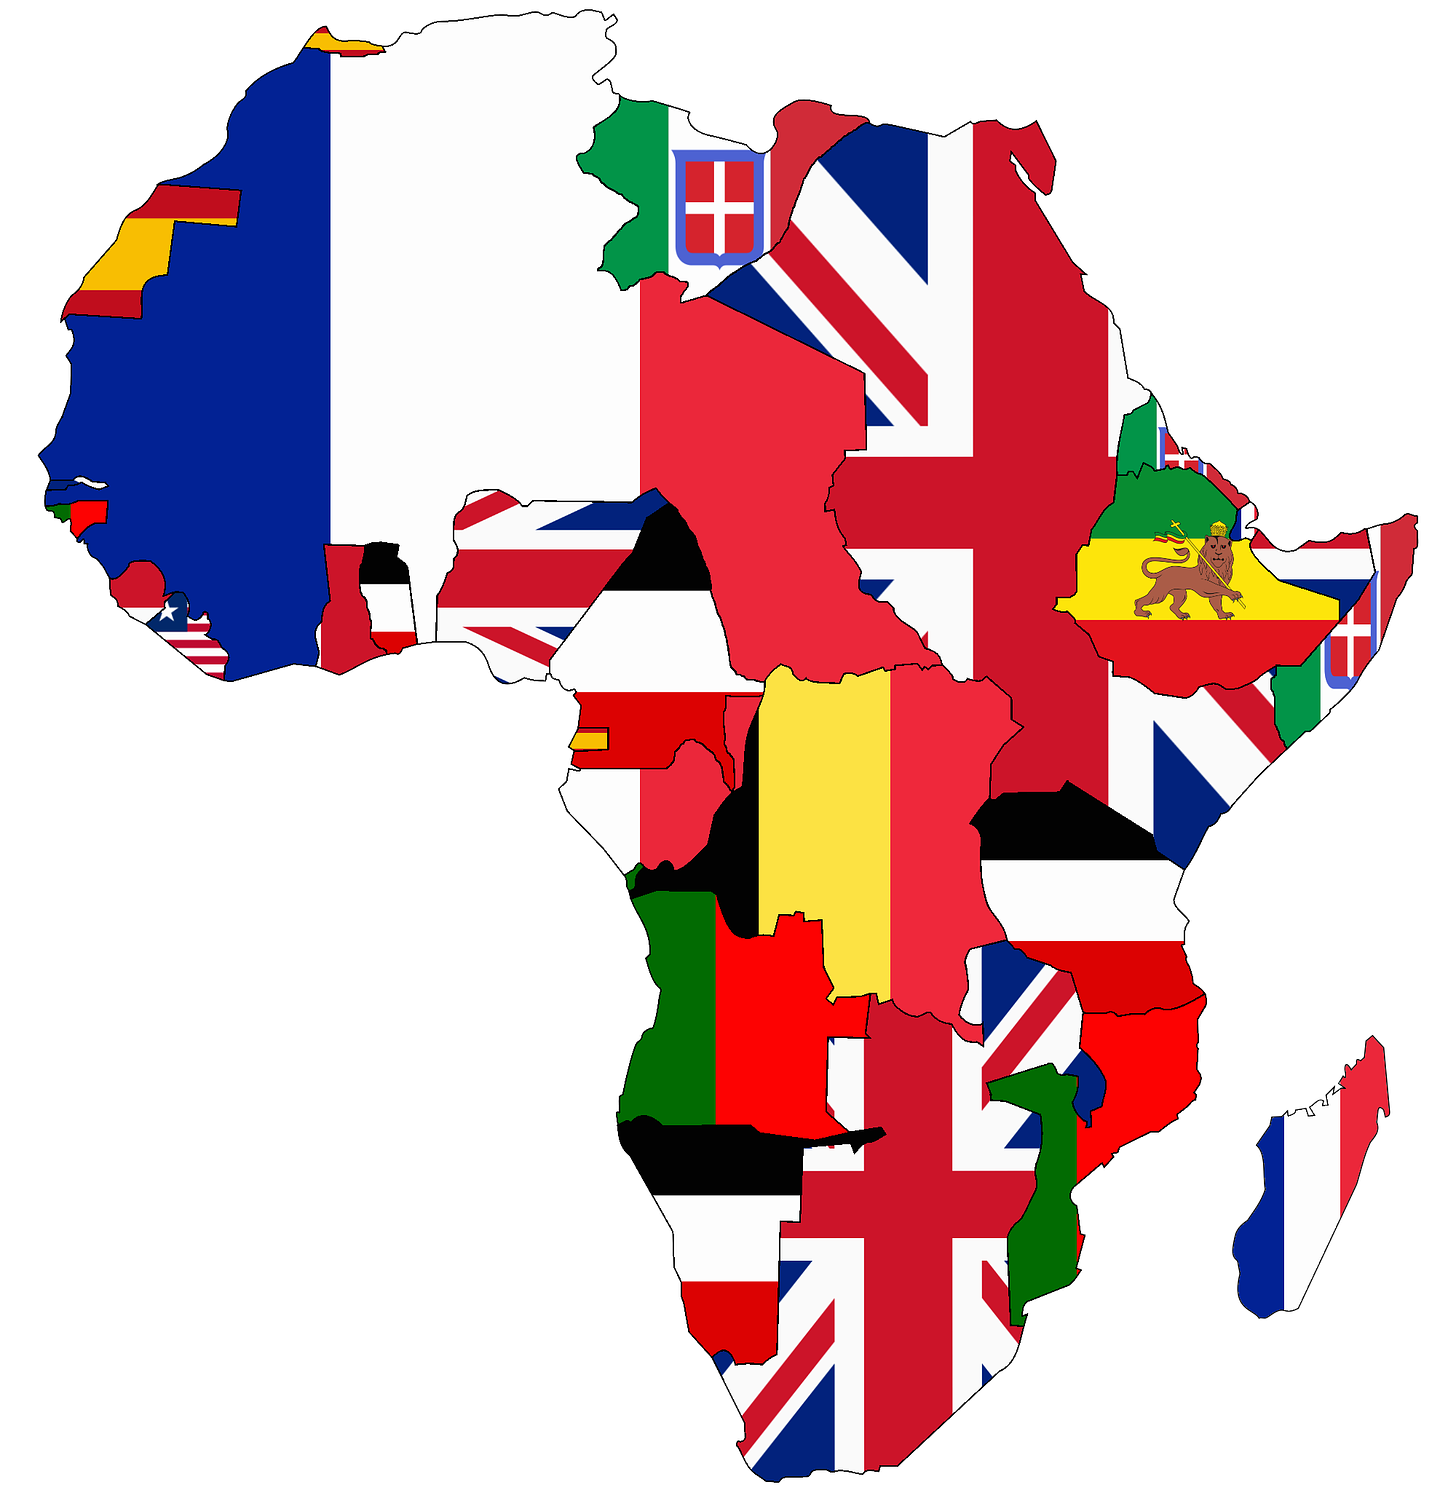 File:Flag map of Colonial Africa (1913).png - Wikimedia Commons